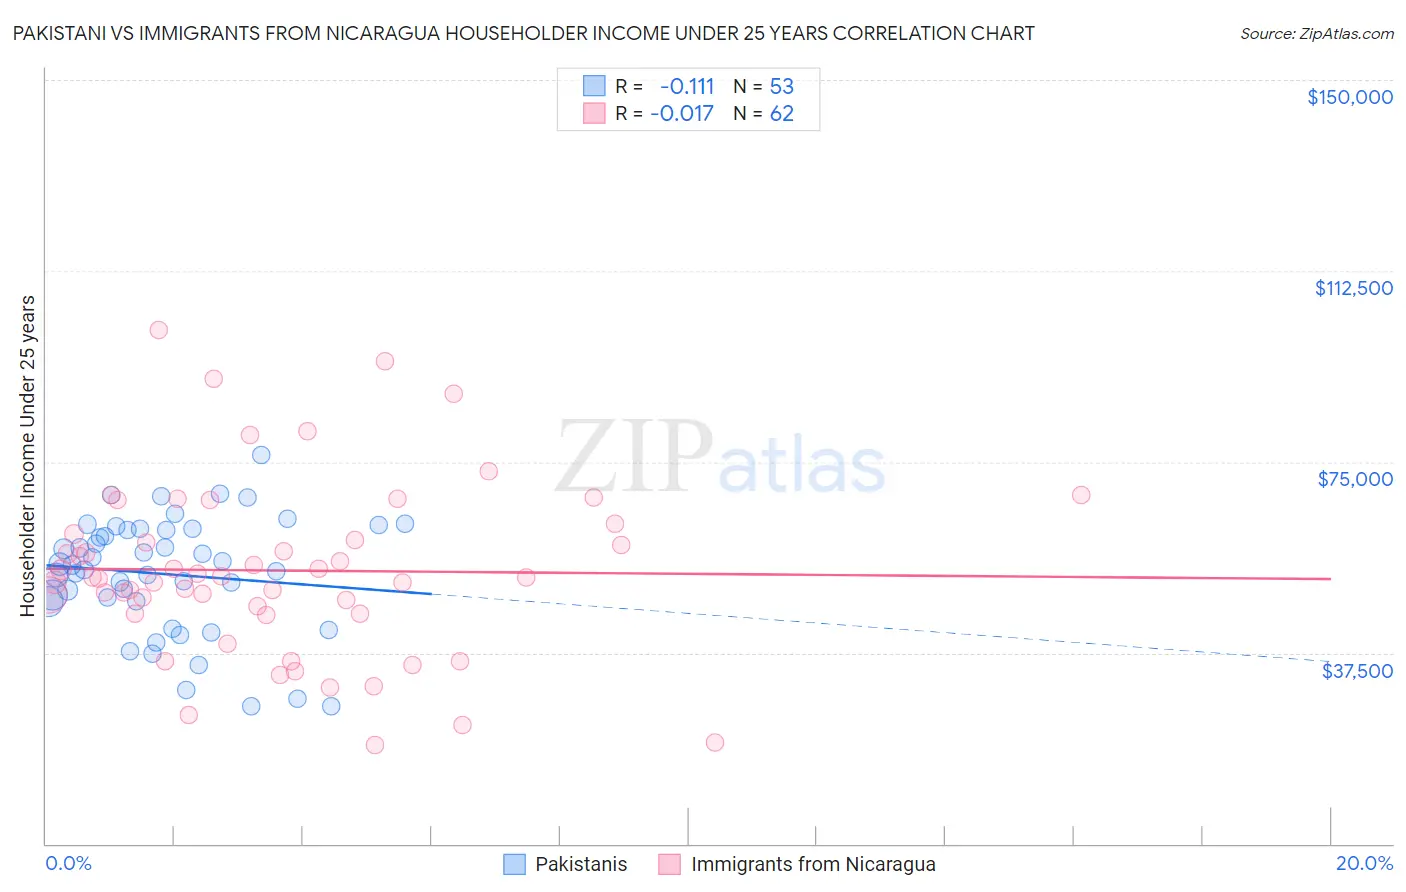 Pakistani vs Immigrants from Nicaragua Householder Income Under 25 years